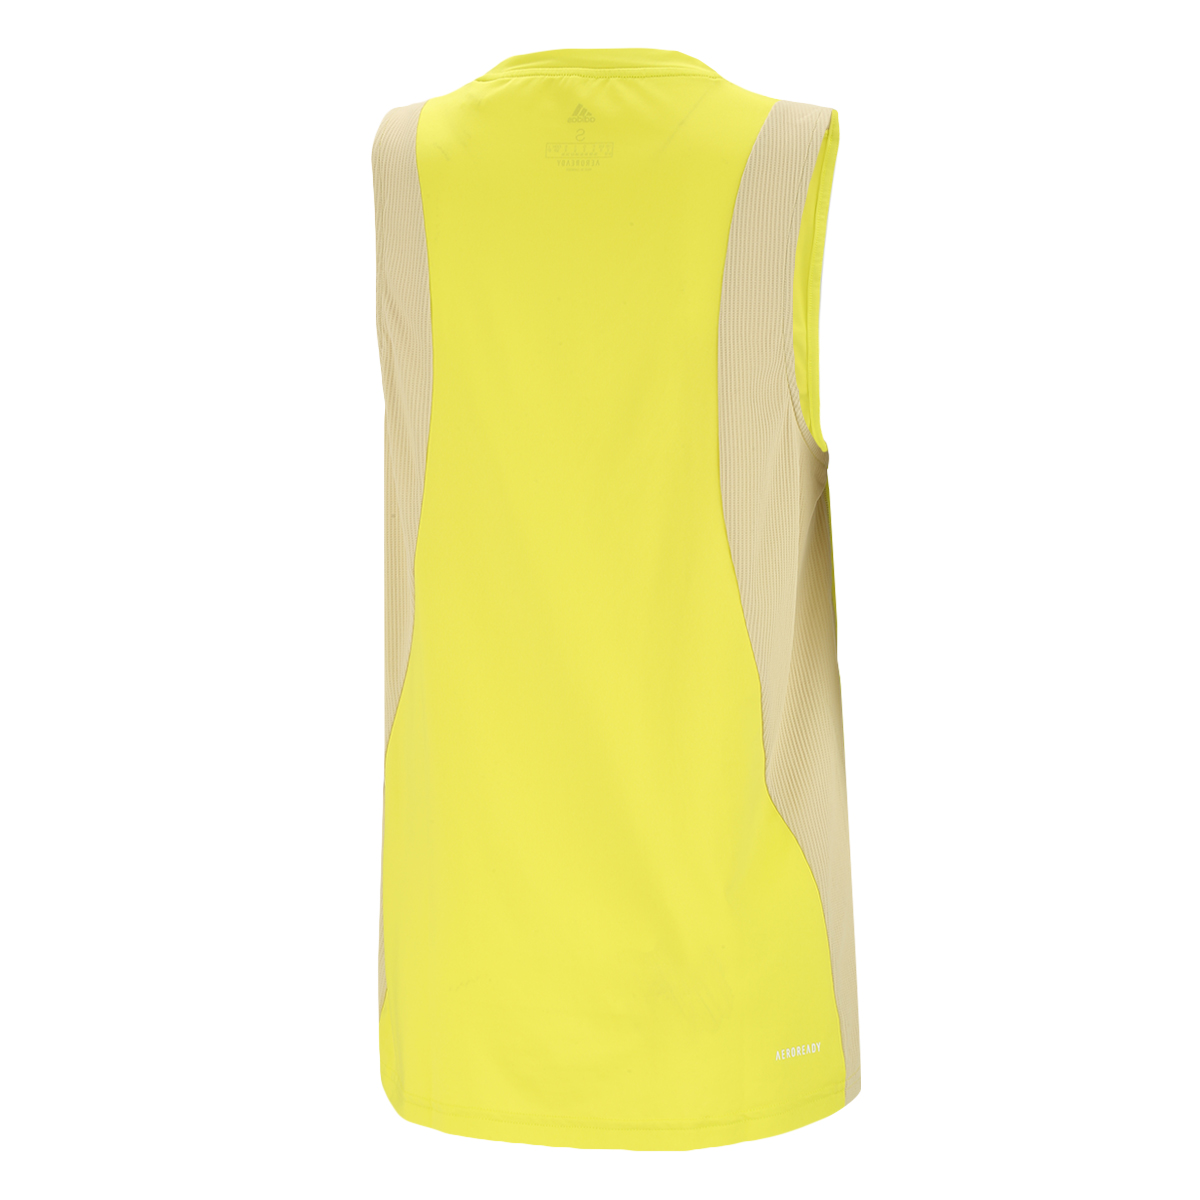 Musculosa adidas Designed To Move,  image number null